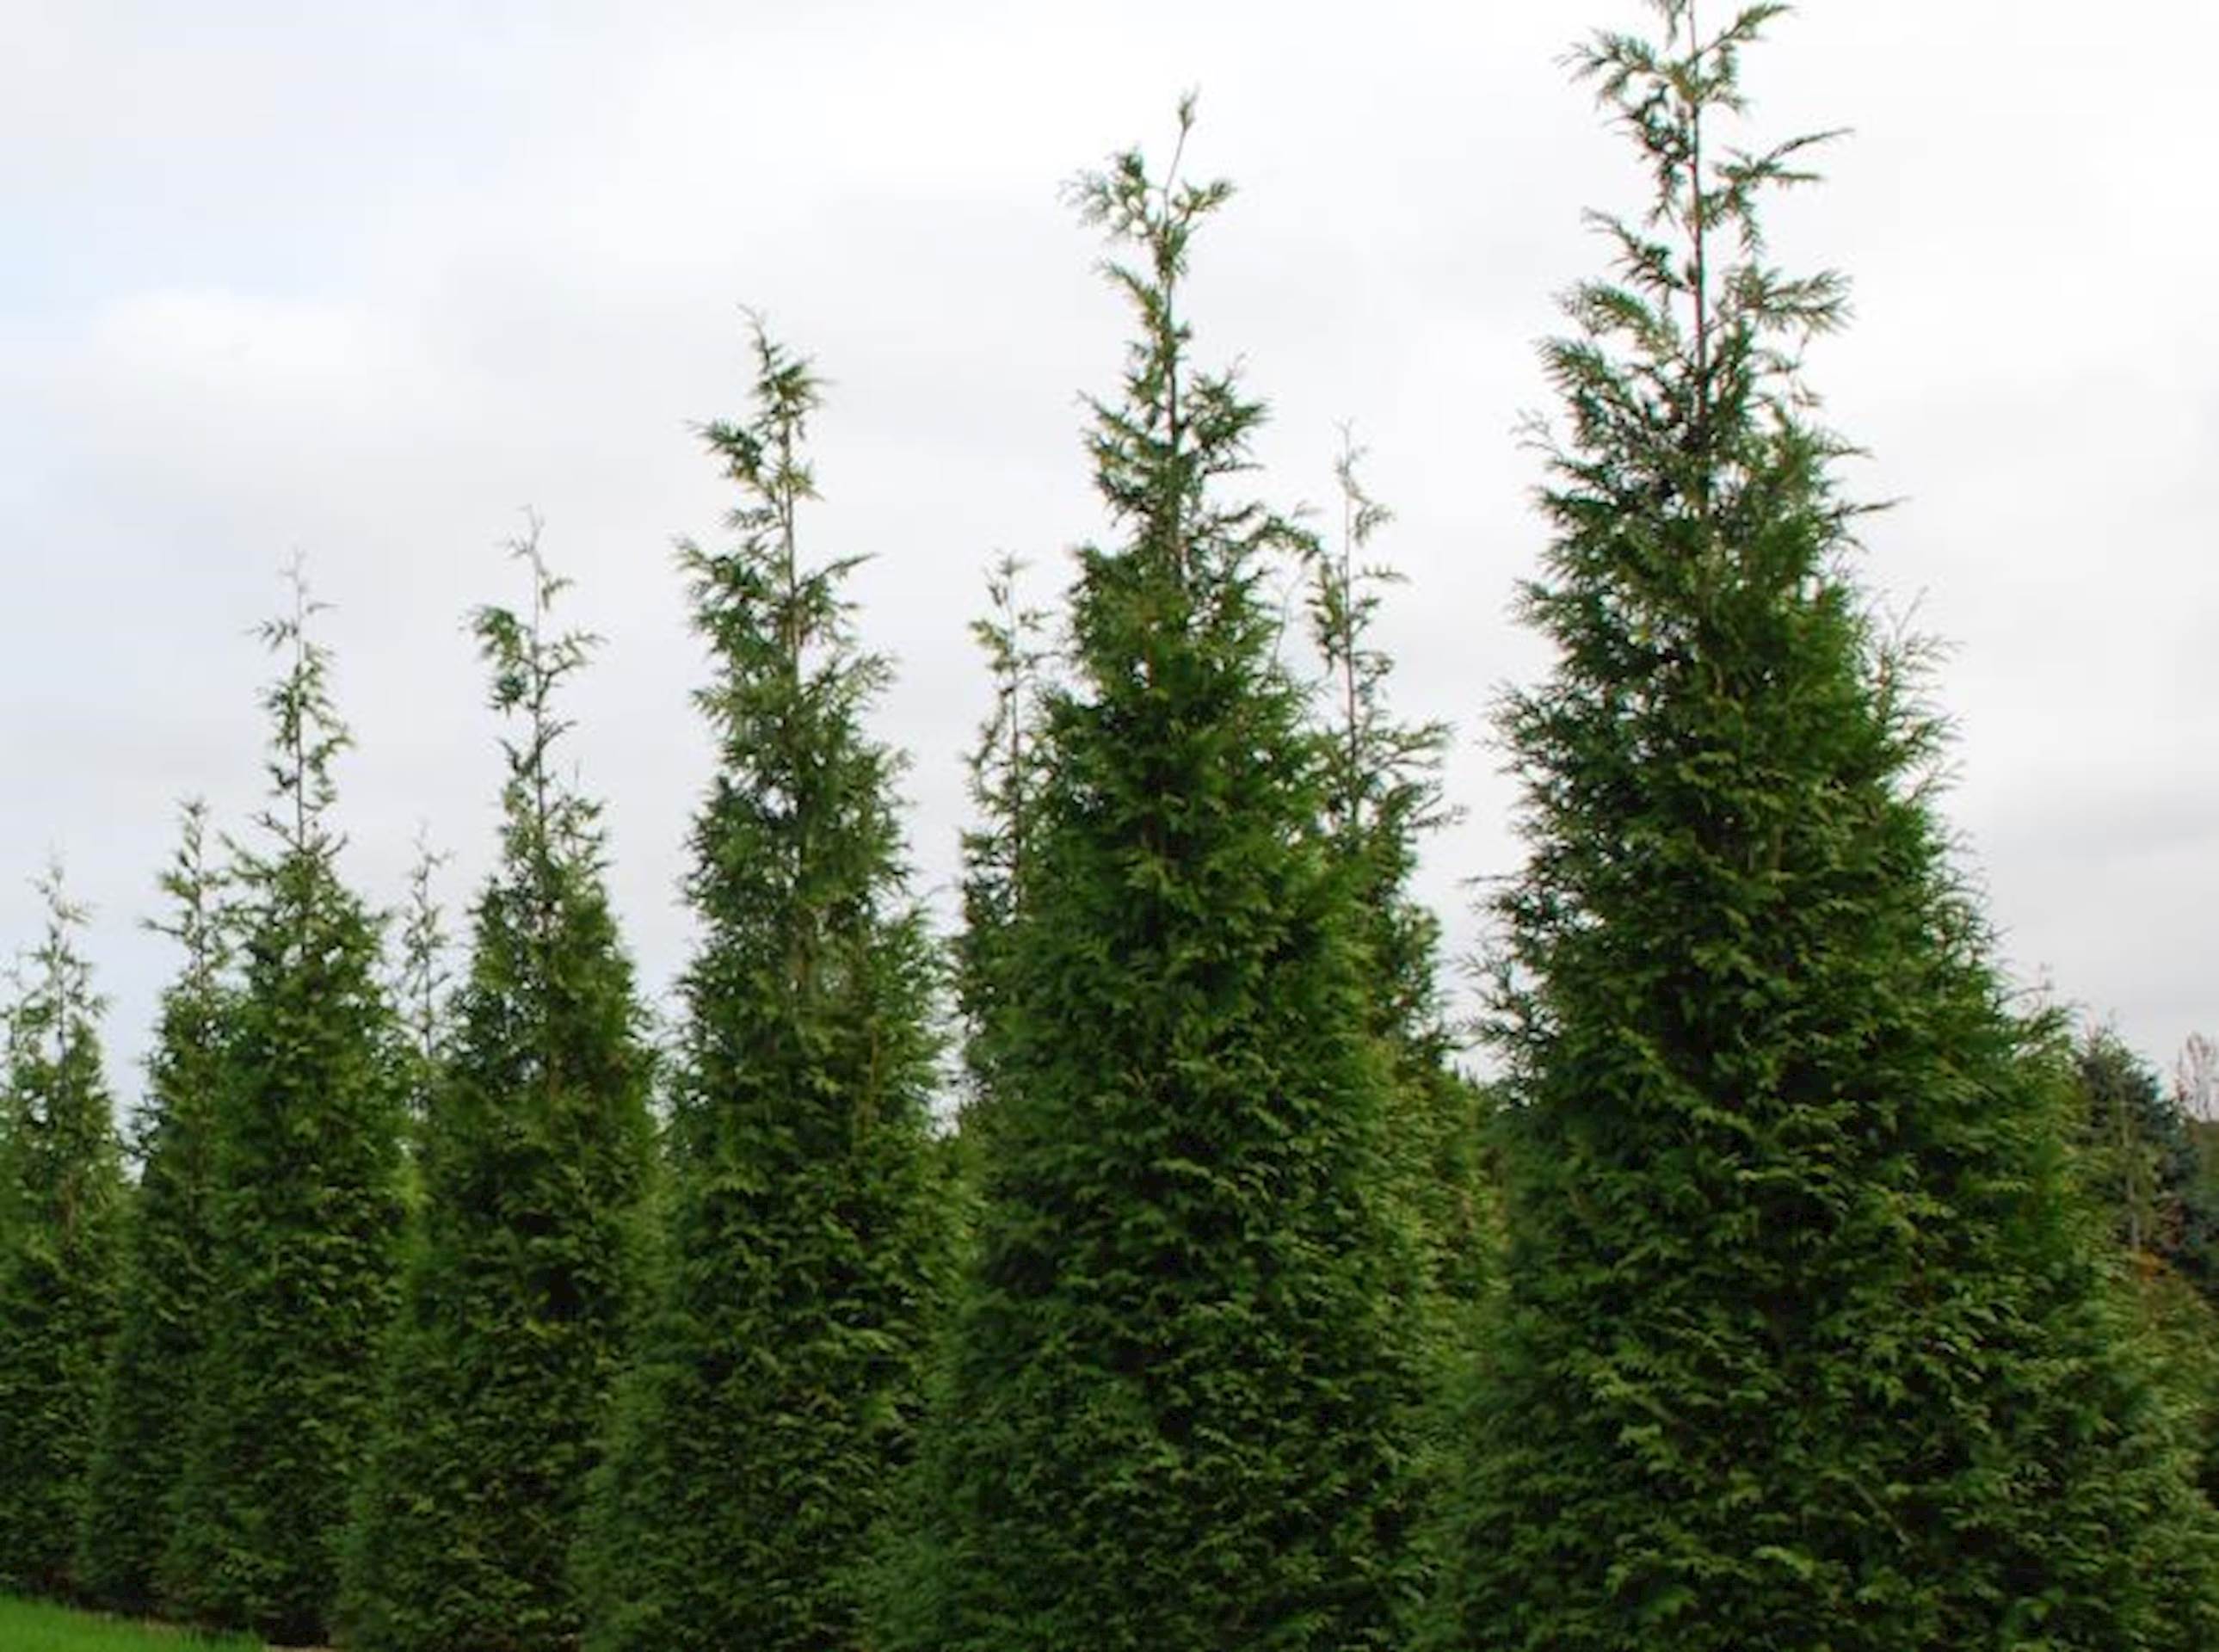 Photo of a line of evergreen trees